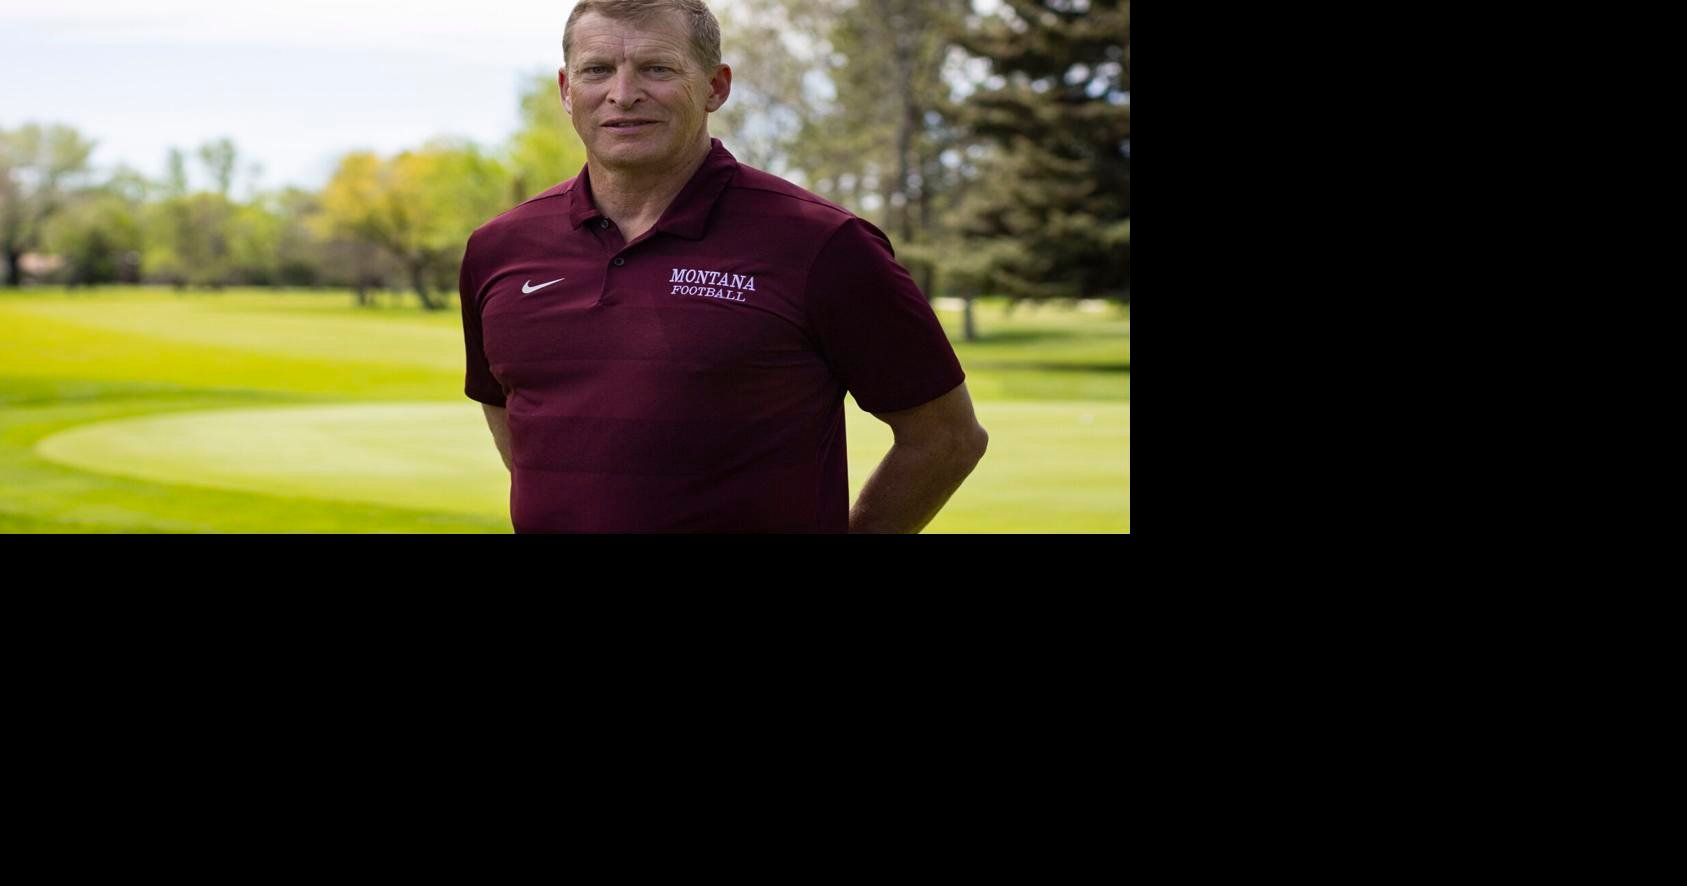 Championship attitude: Bobby Hauck, Montana Grizzlies channel football ambition on spring tour